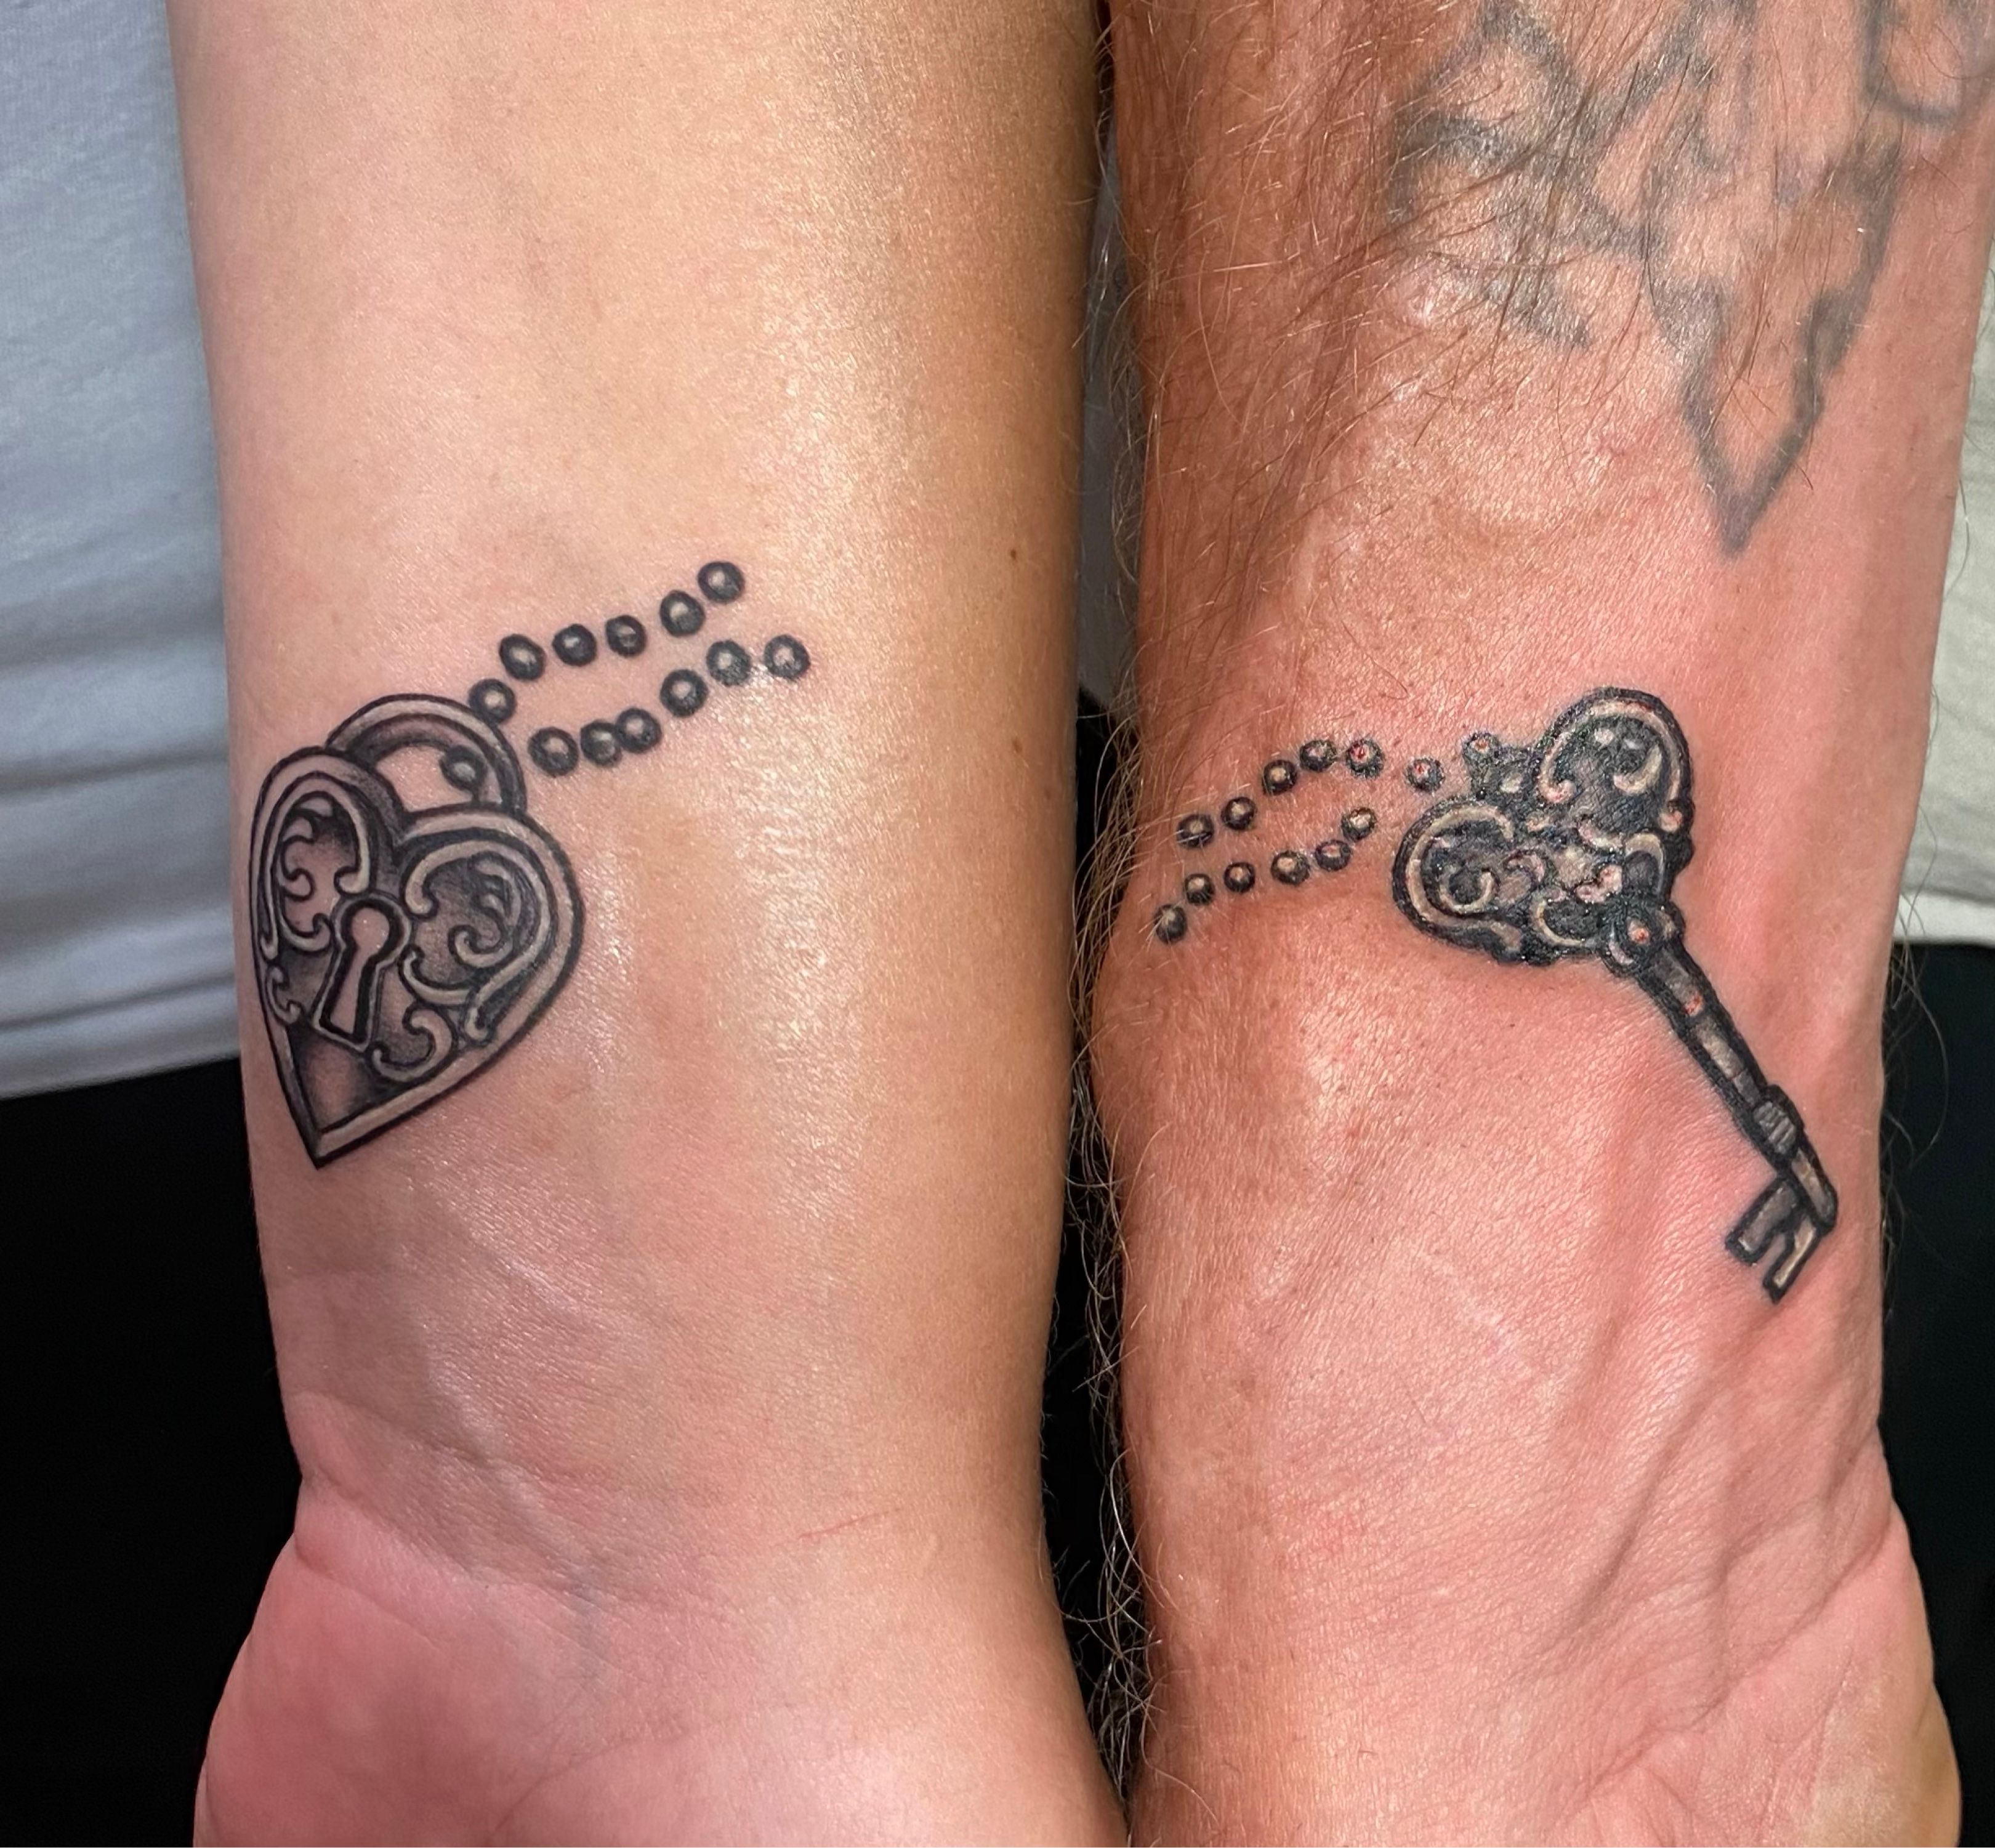 Lock and key matchig tattoo for couple done in fine